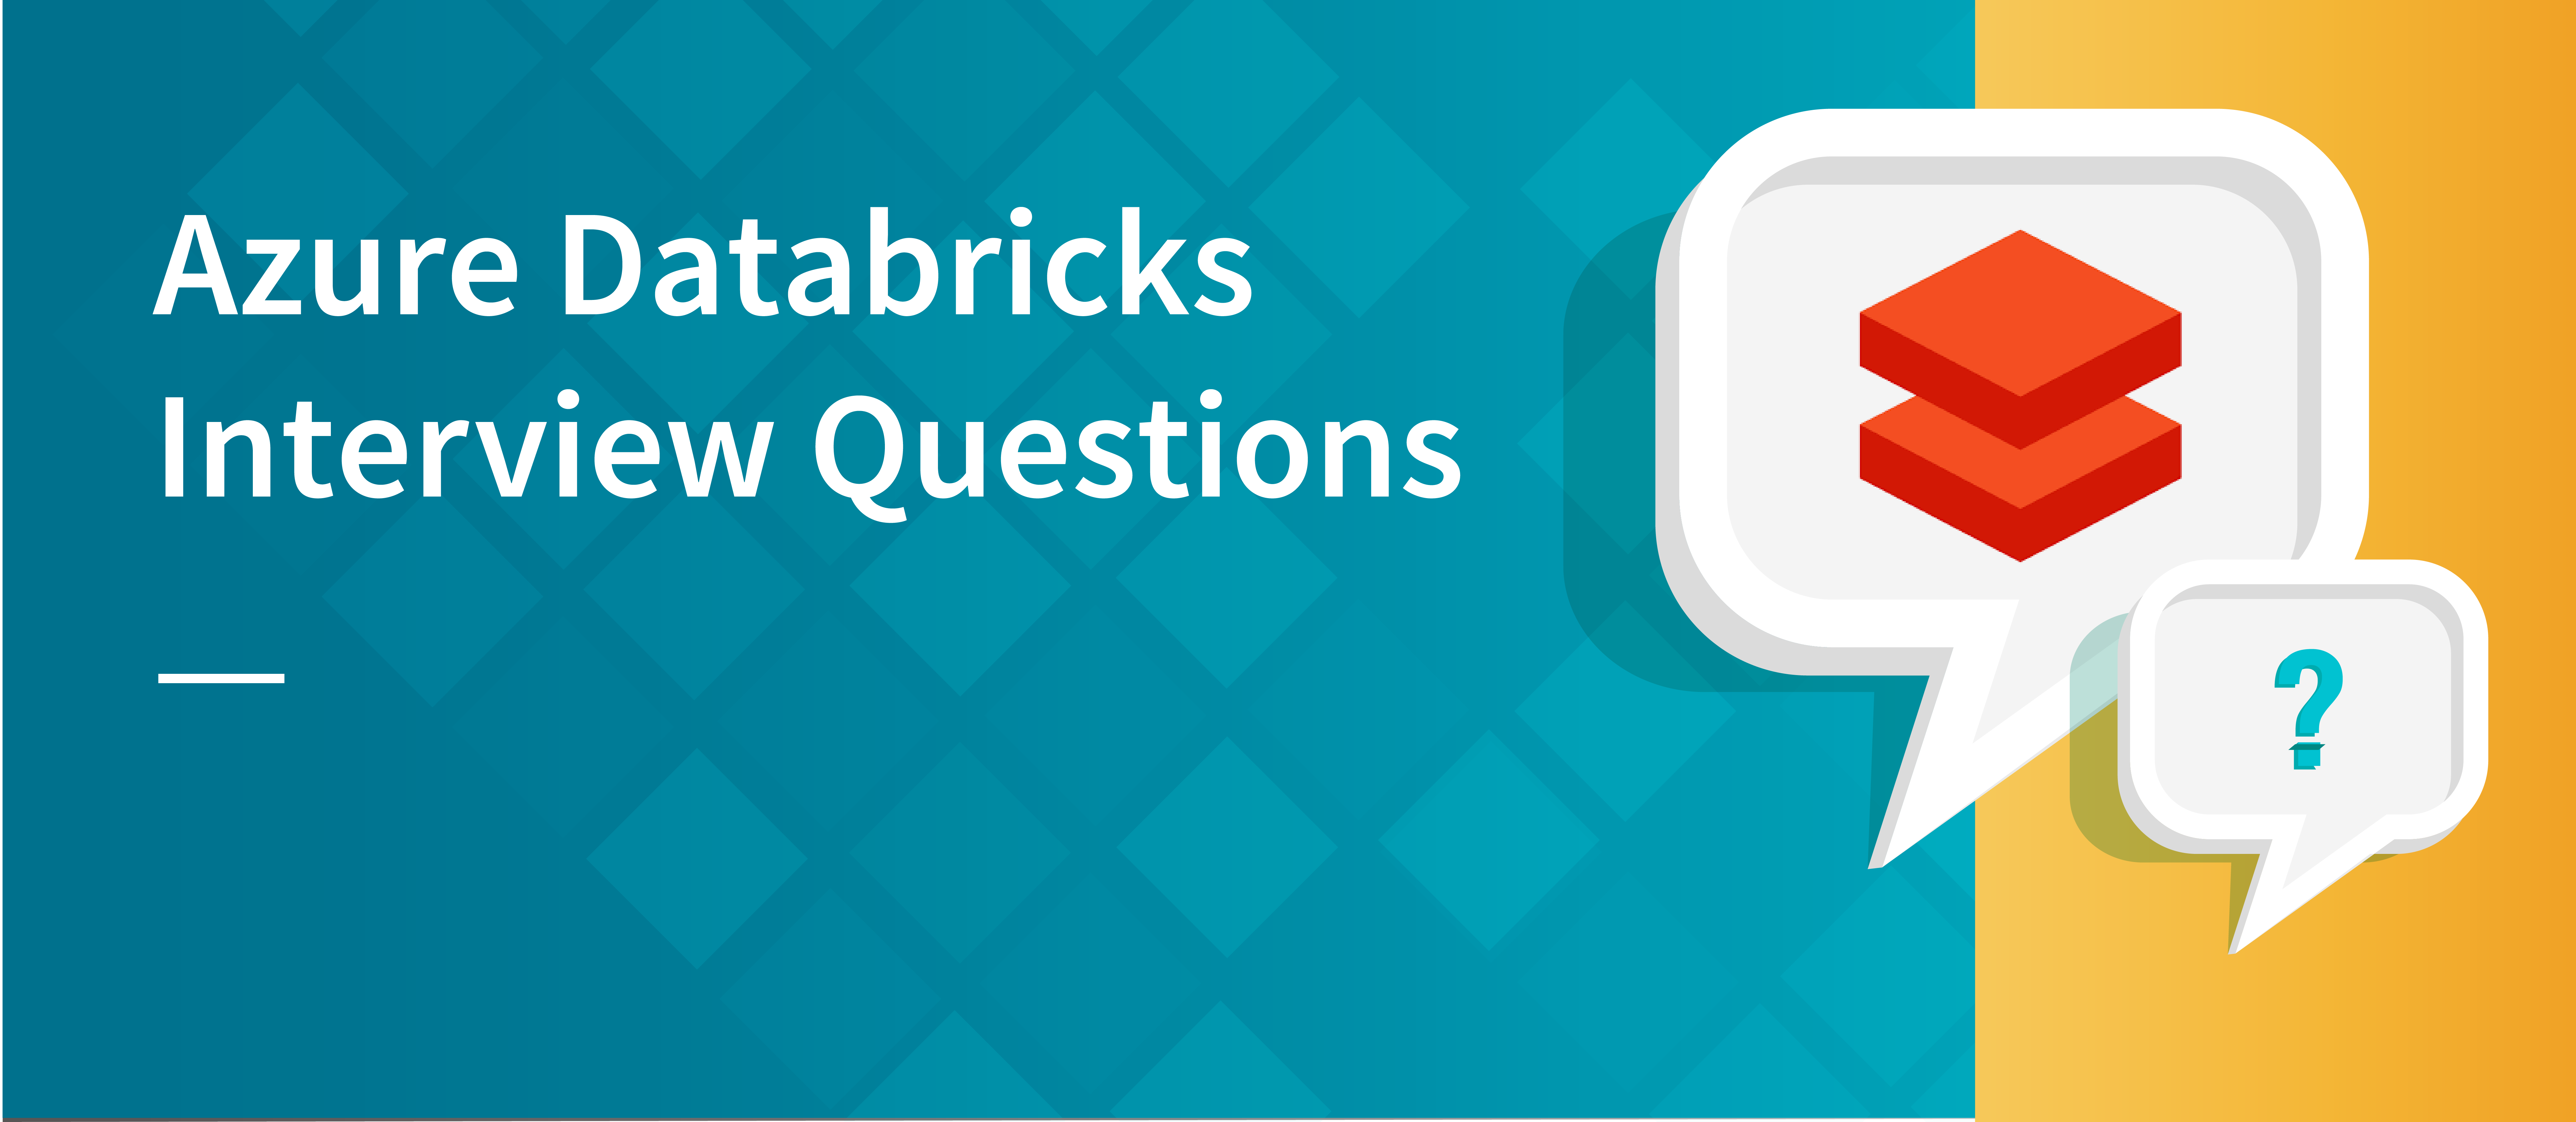 Azure Databricks Interview Questions and Answers: Mastering the Data Analytics Job Interview